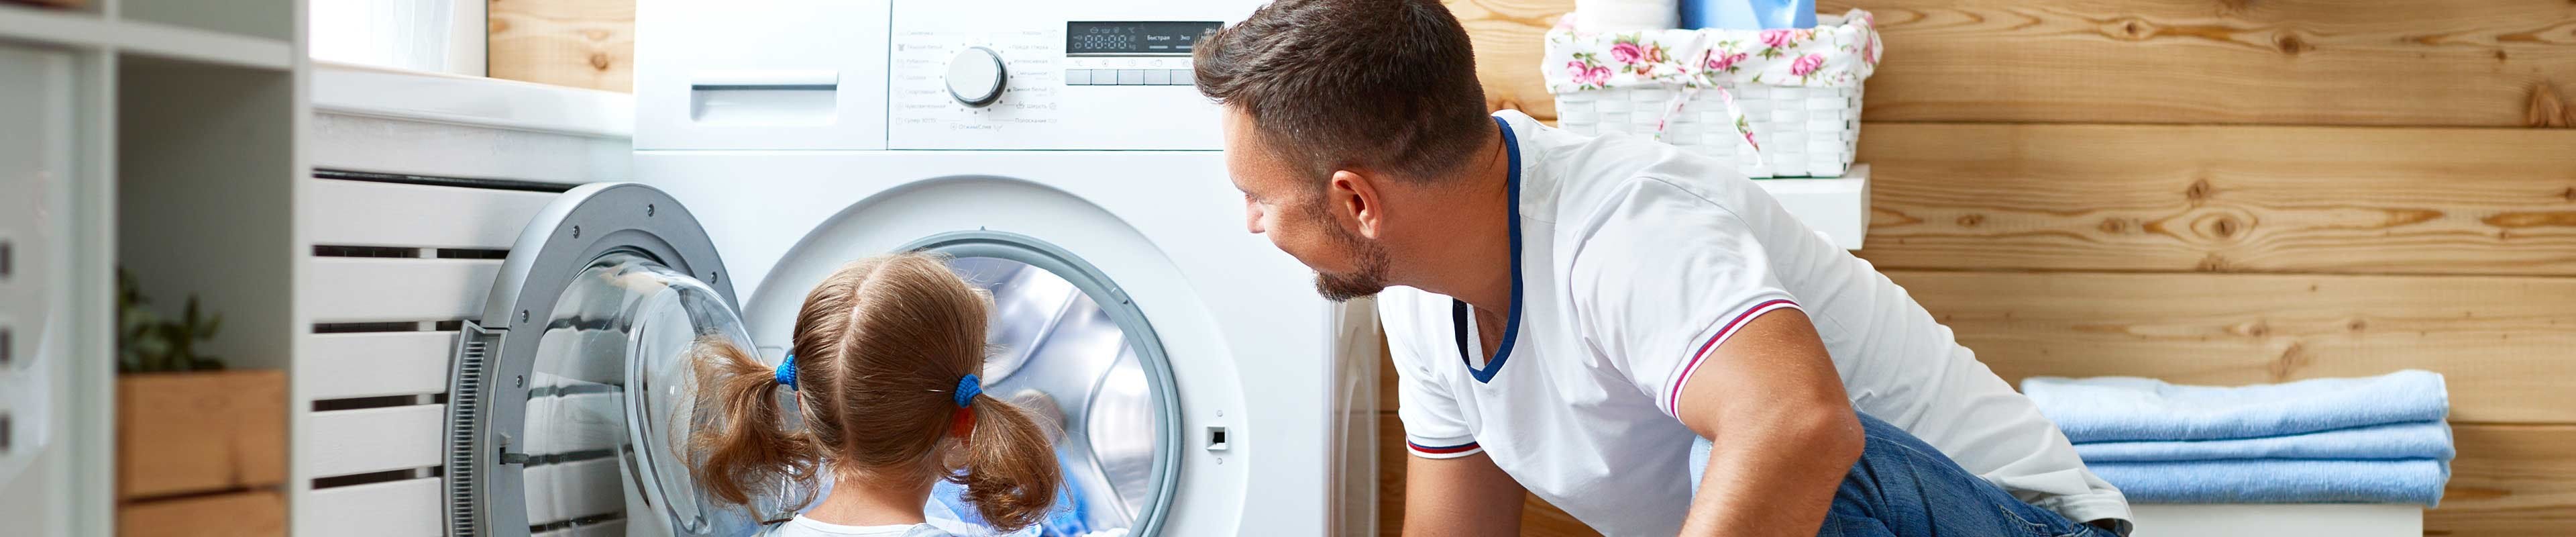 Dad and daughter doing laundry together